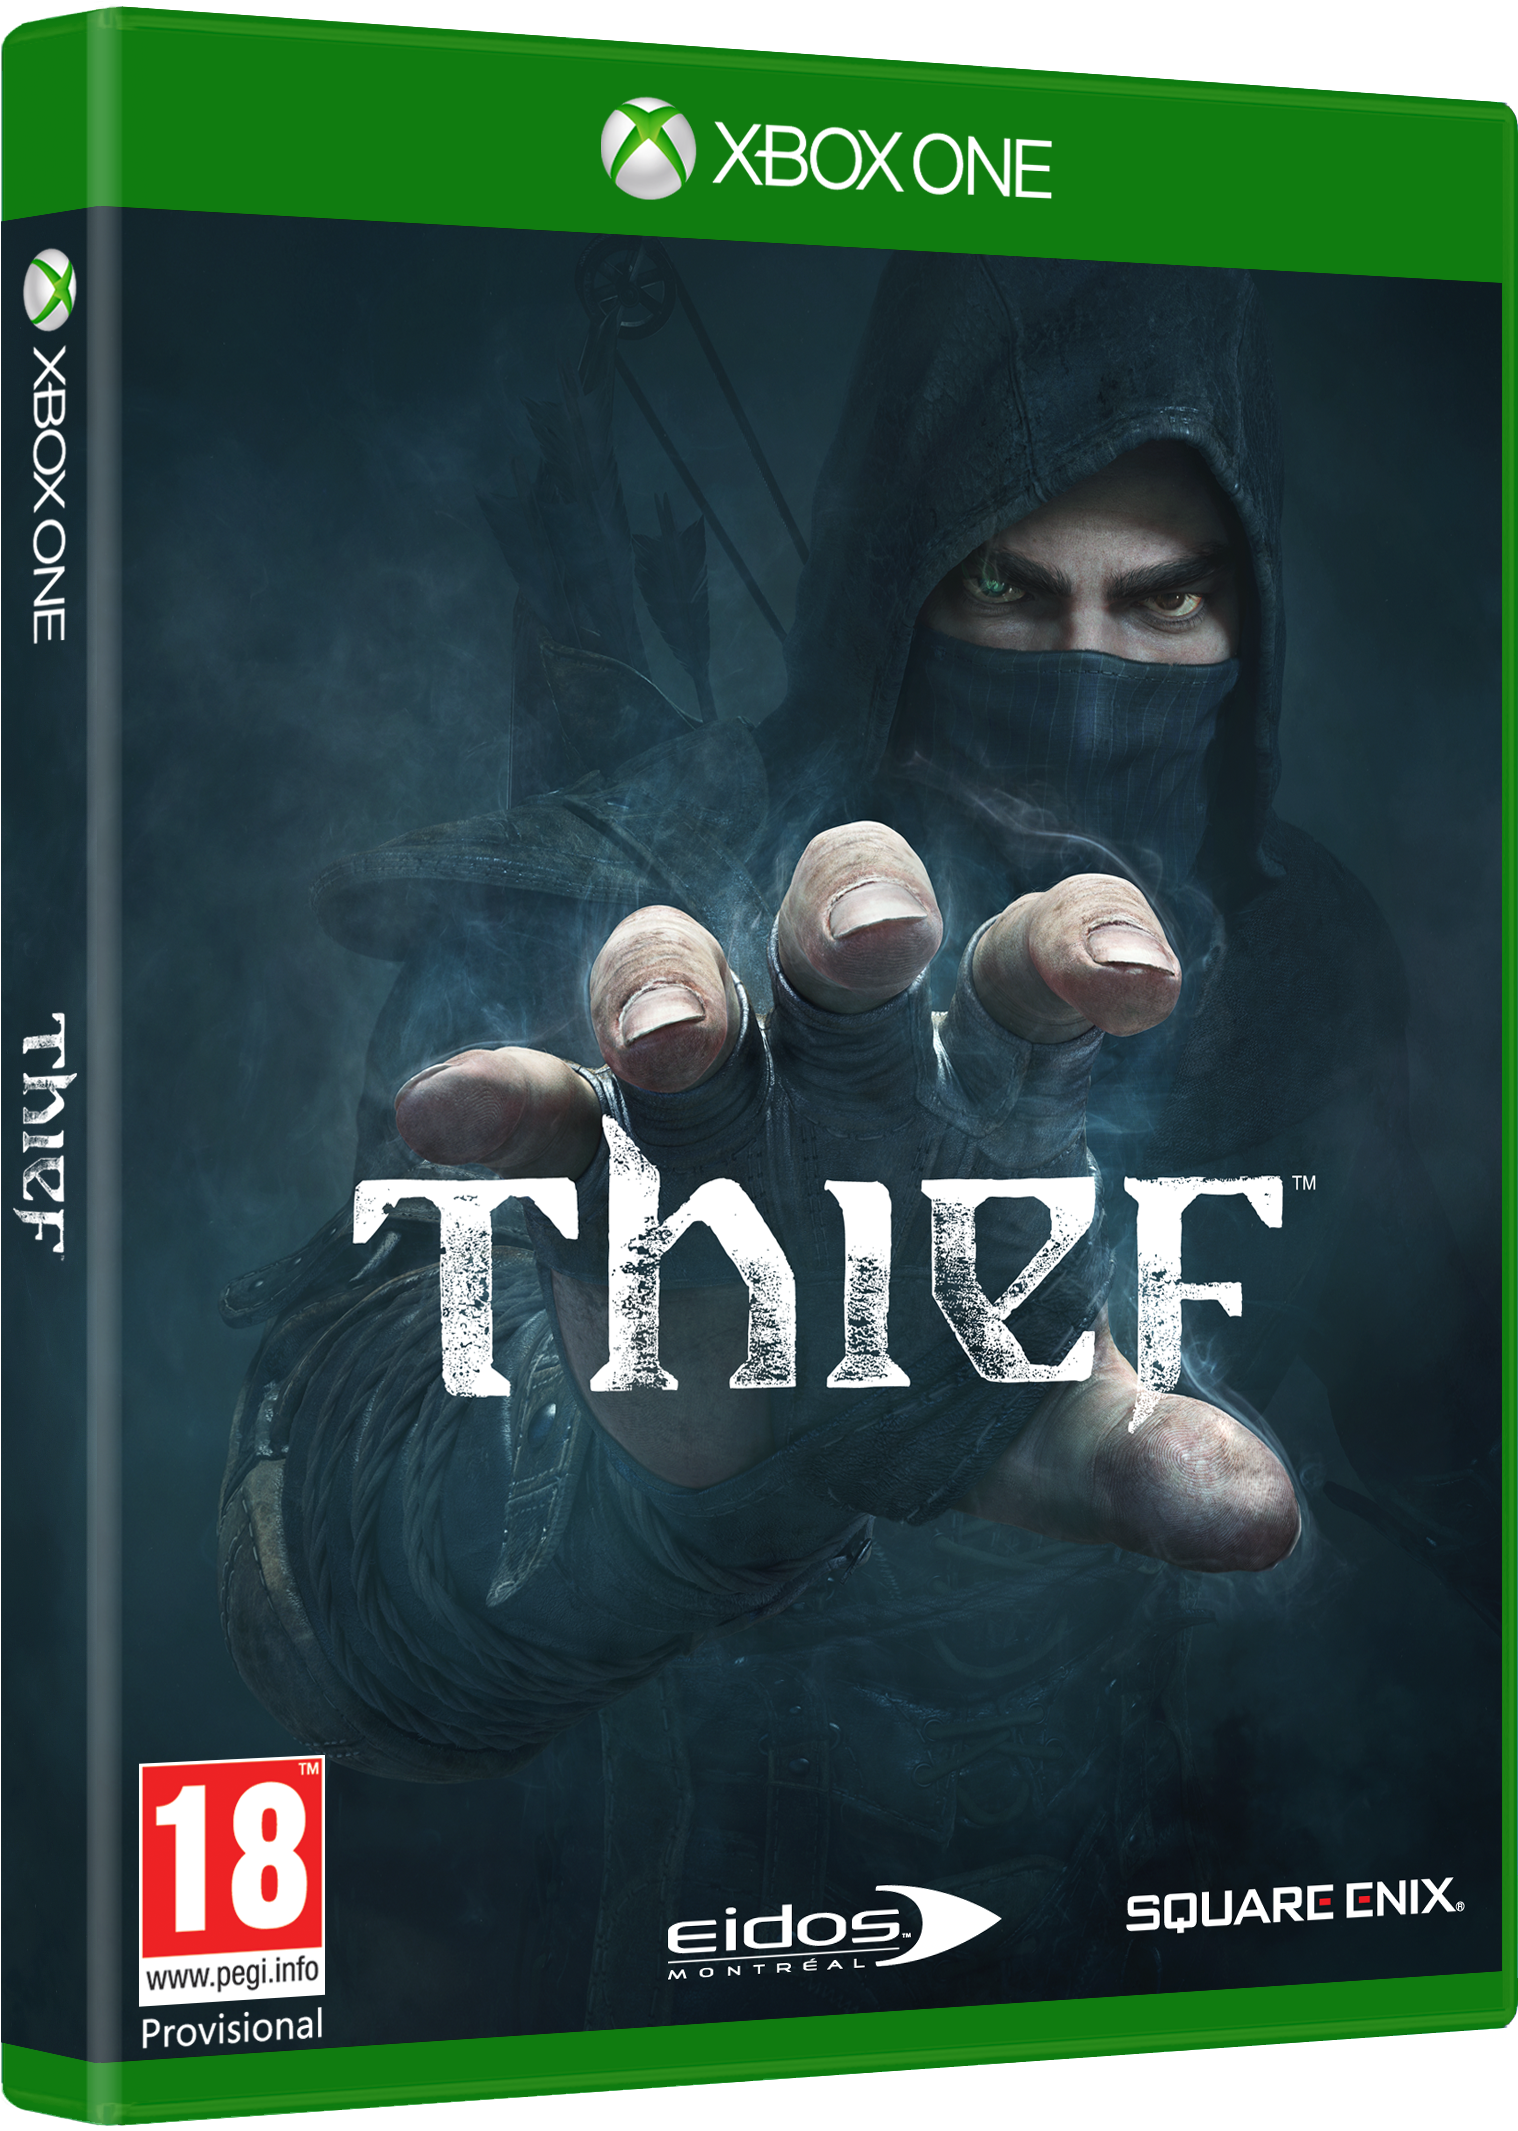 A Video Game Cover With A Person In A Black Hood